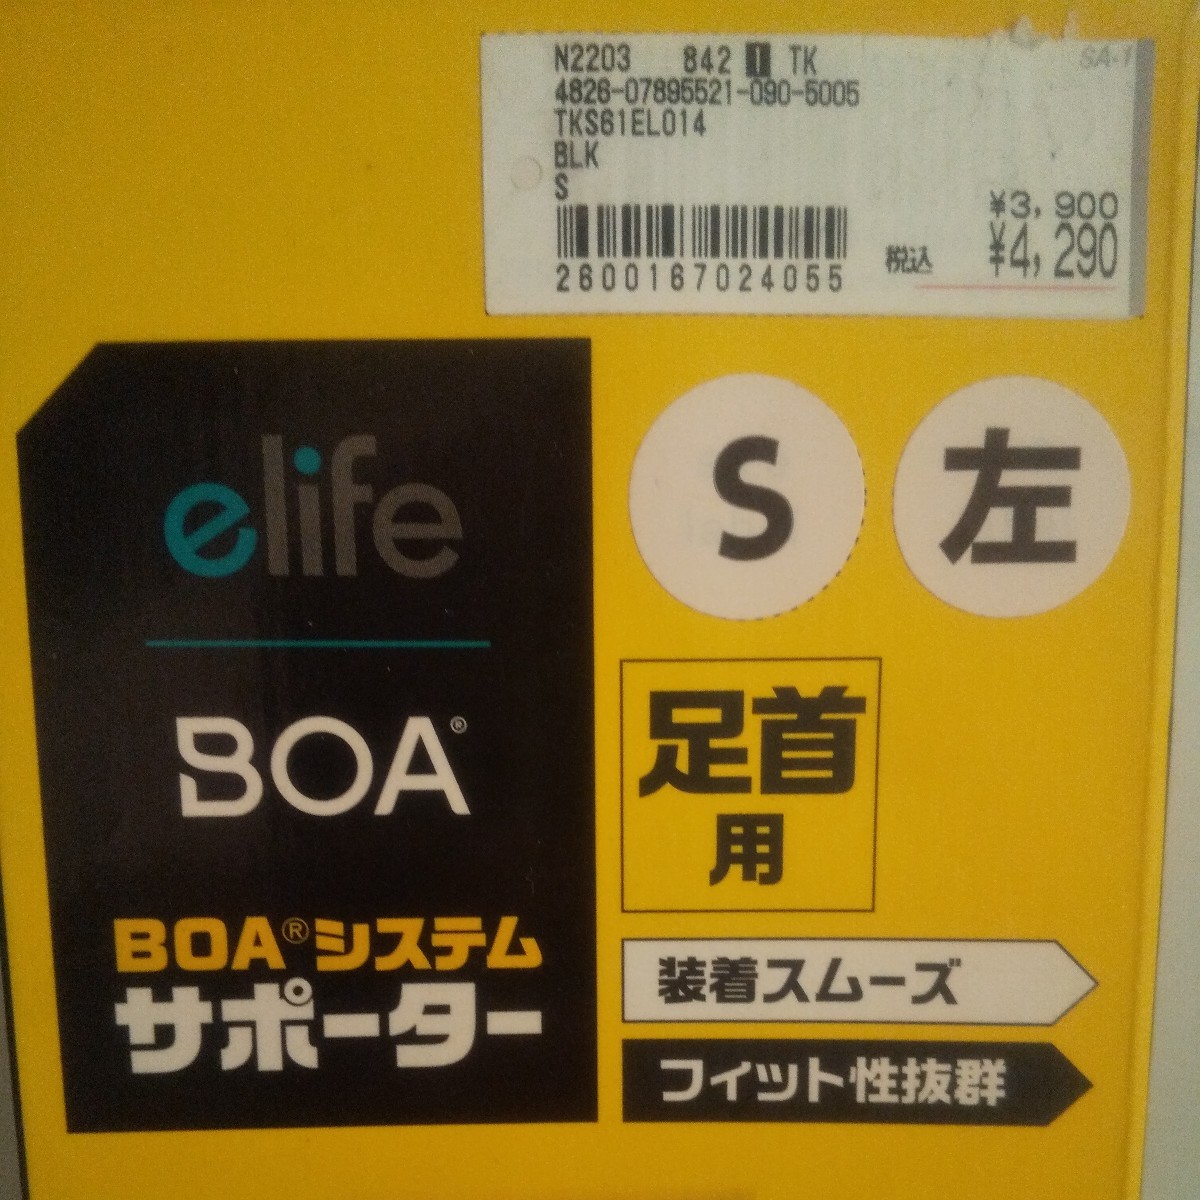 BOA supporter BOA system supporter for ankle left size S regular price including tax 4290 jpy new goods unused new goods 